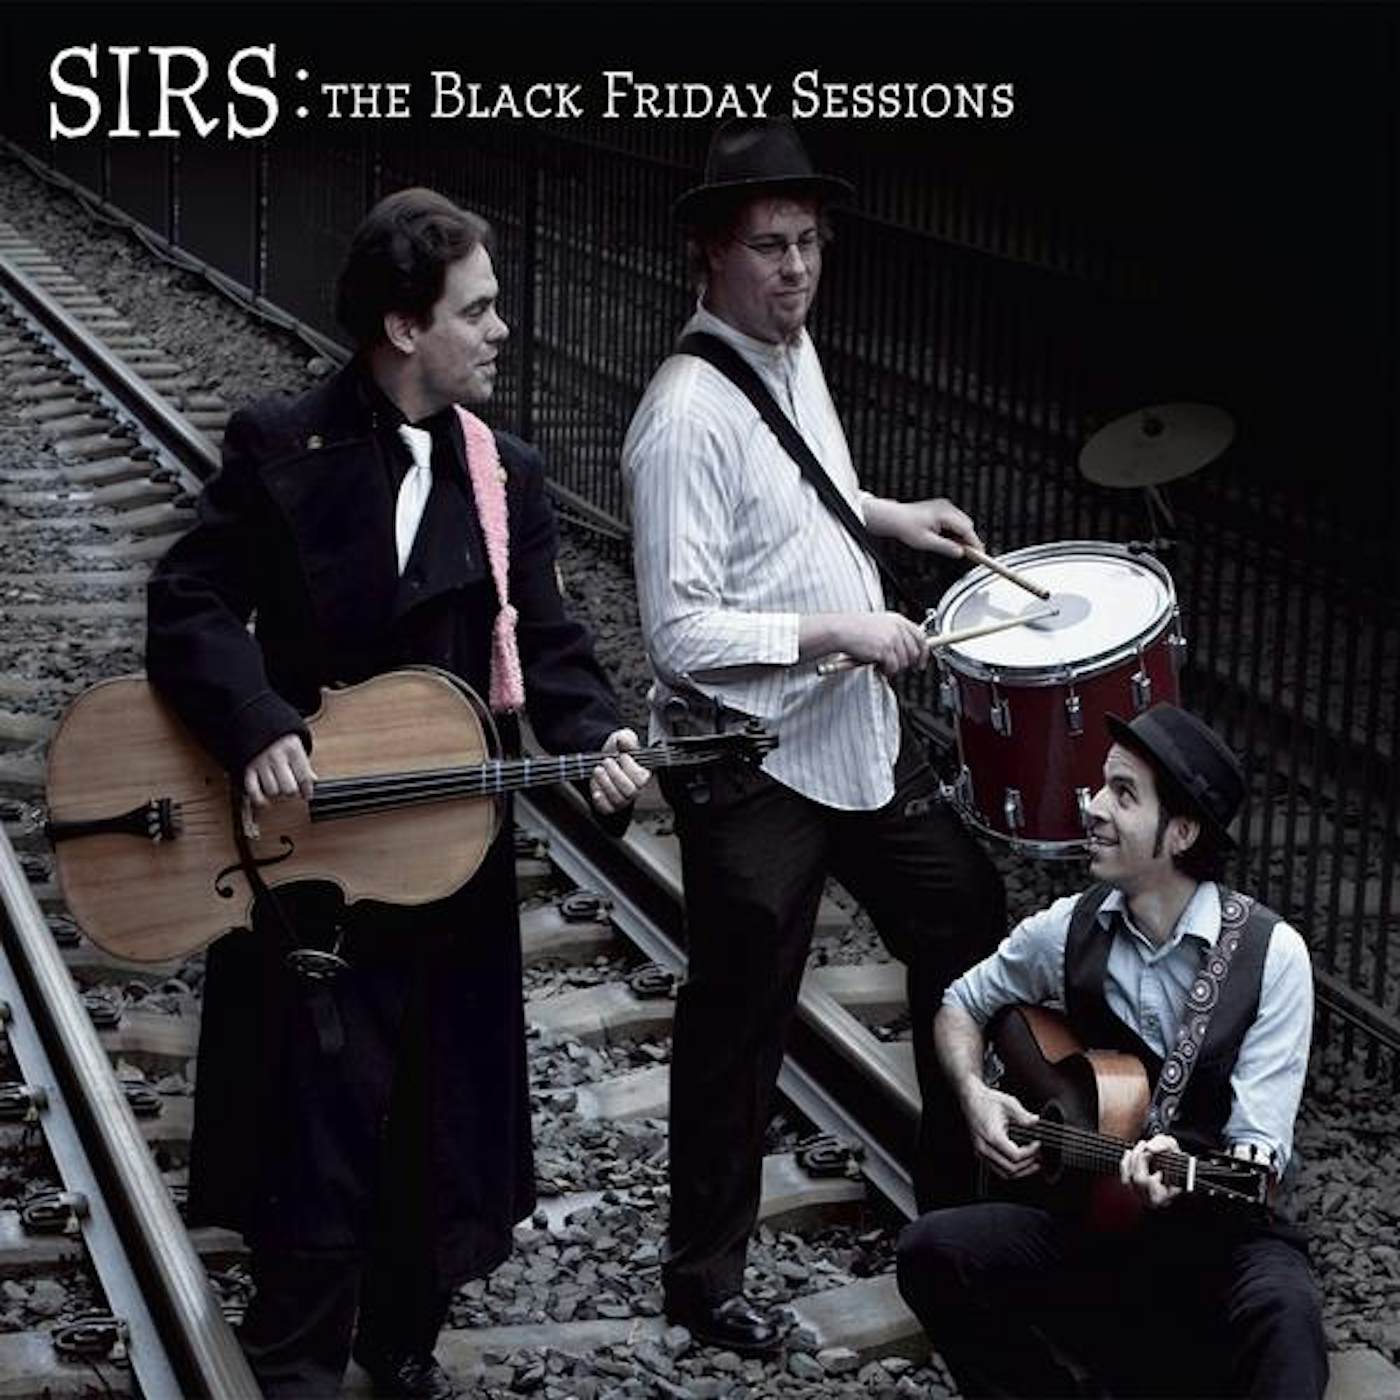 Sirs BLACK FRIDAY SESSIONS CD